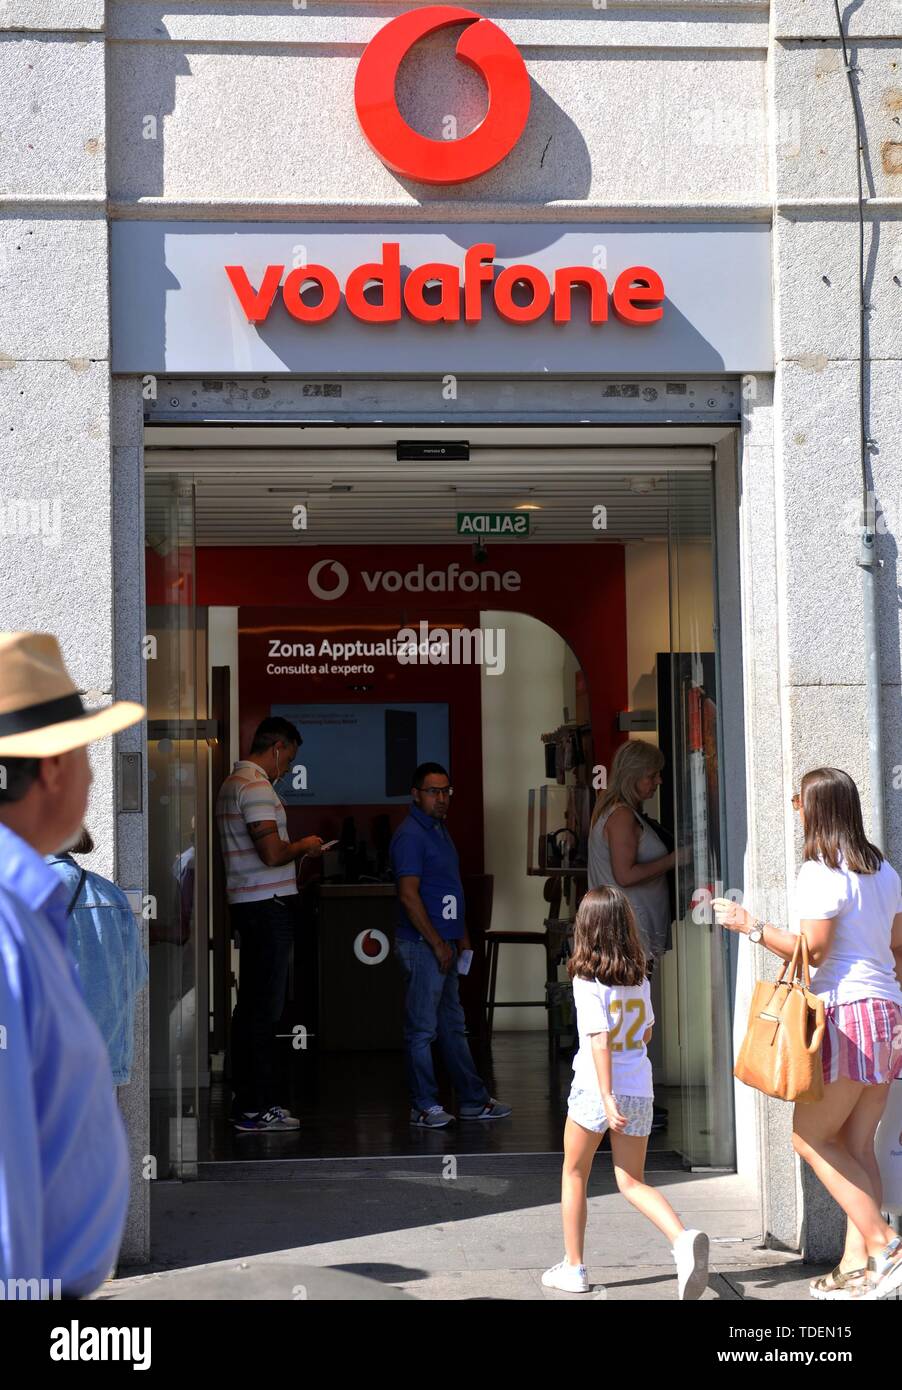 Madrid, Spain. 15th June, 2019. Photo taken on June 15, 2019 shows a store of Vodafone Espana in Madrid, Spain. In cooperation with Chinese telecom giant Huawei, Vodafone Espana on Saturday rolled out the first commercial 5G mobile services in Spain, making it one of the first European countries with the ultrafast mobile network in Europe. Credit: Guo Qiuda/Xinhua/Alamy Live News Stock Photo